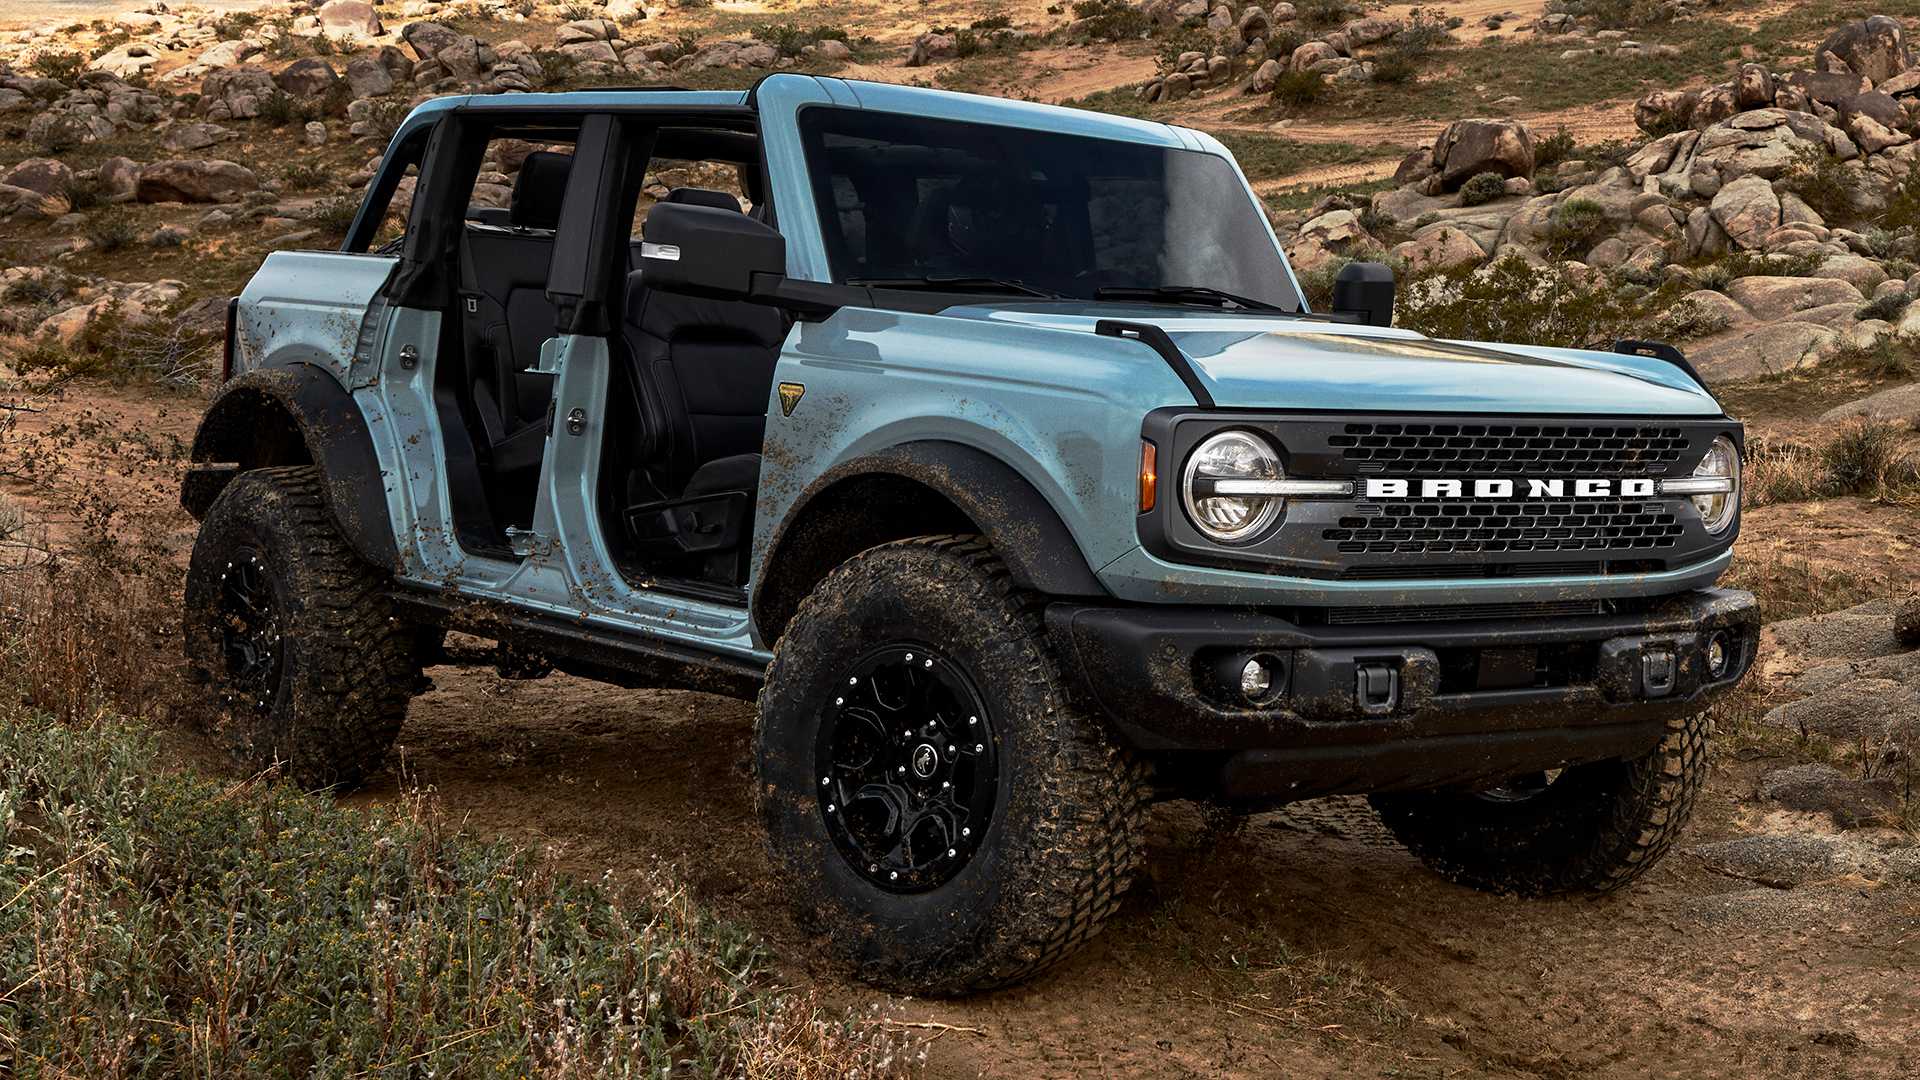 Jeep reveals Wrangler Rubicon 392 Concept with 450-hp V8